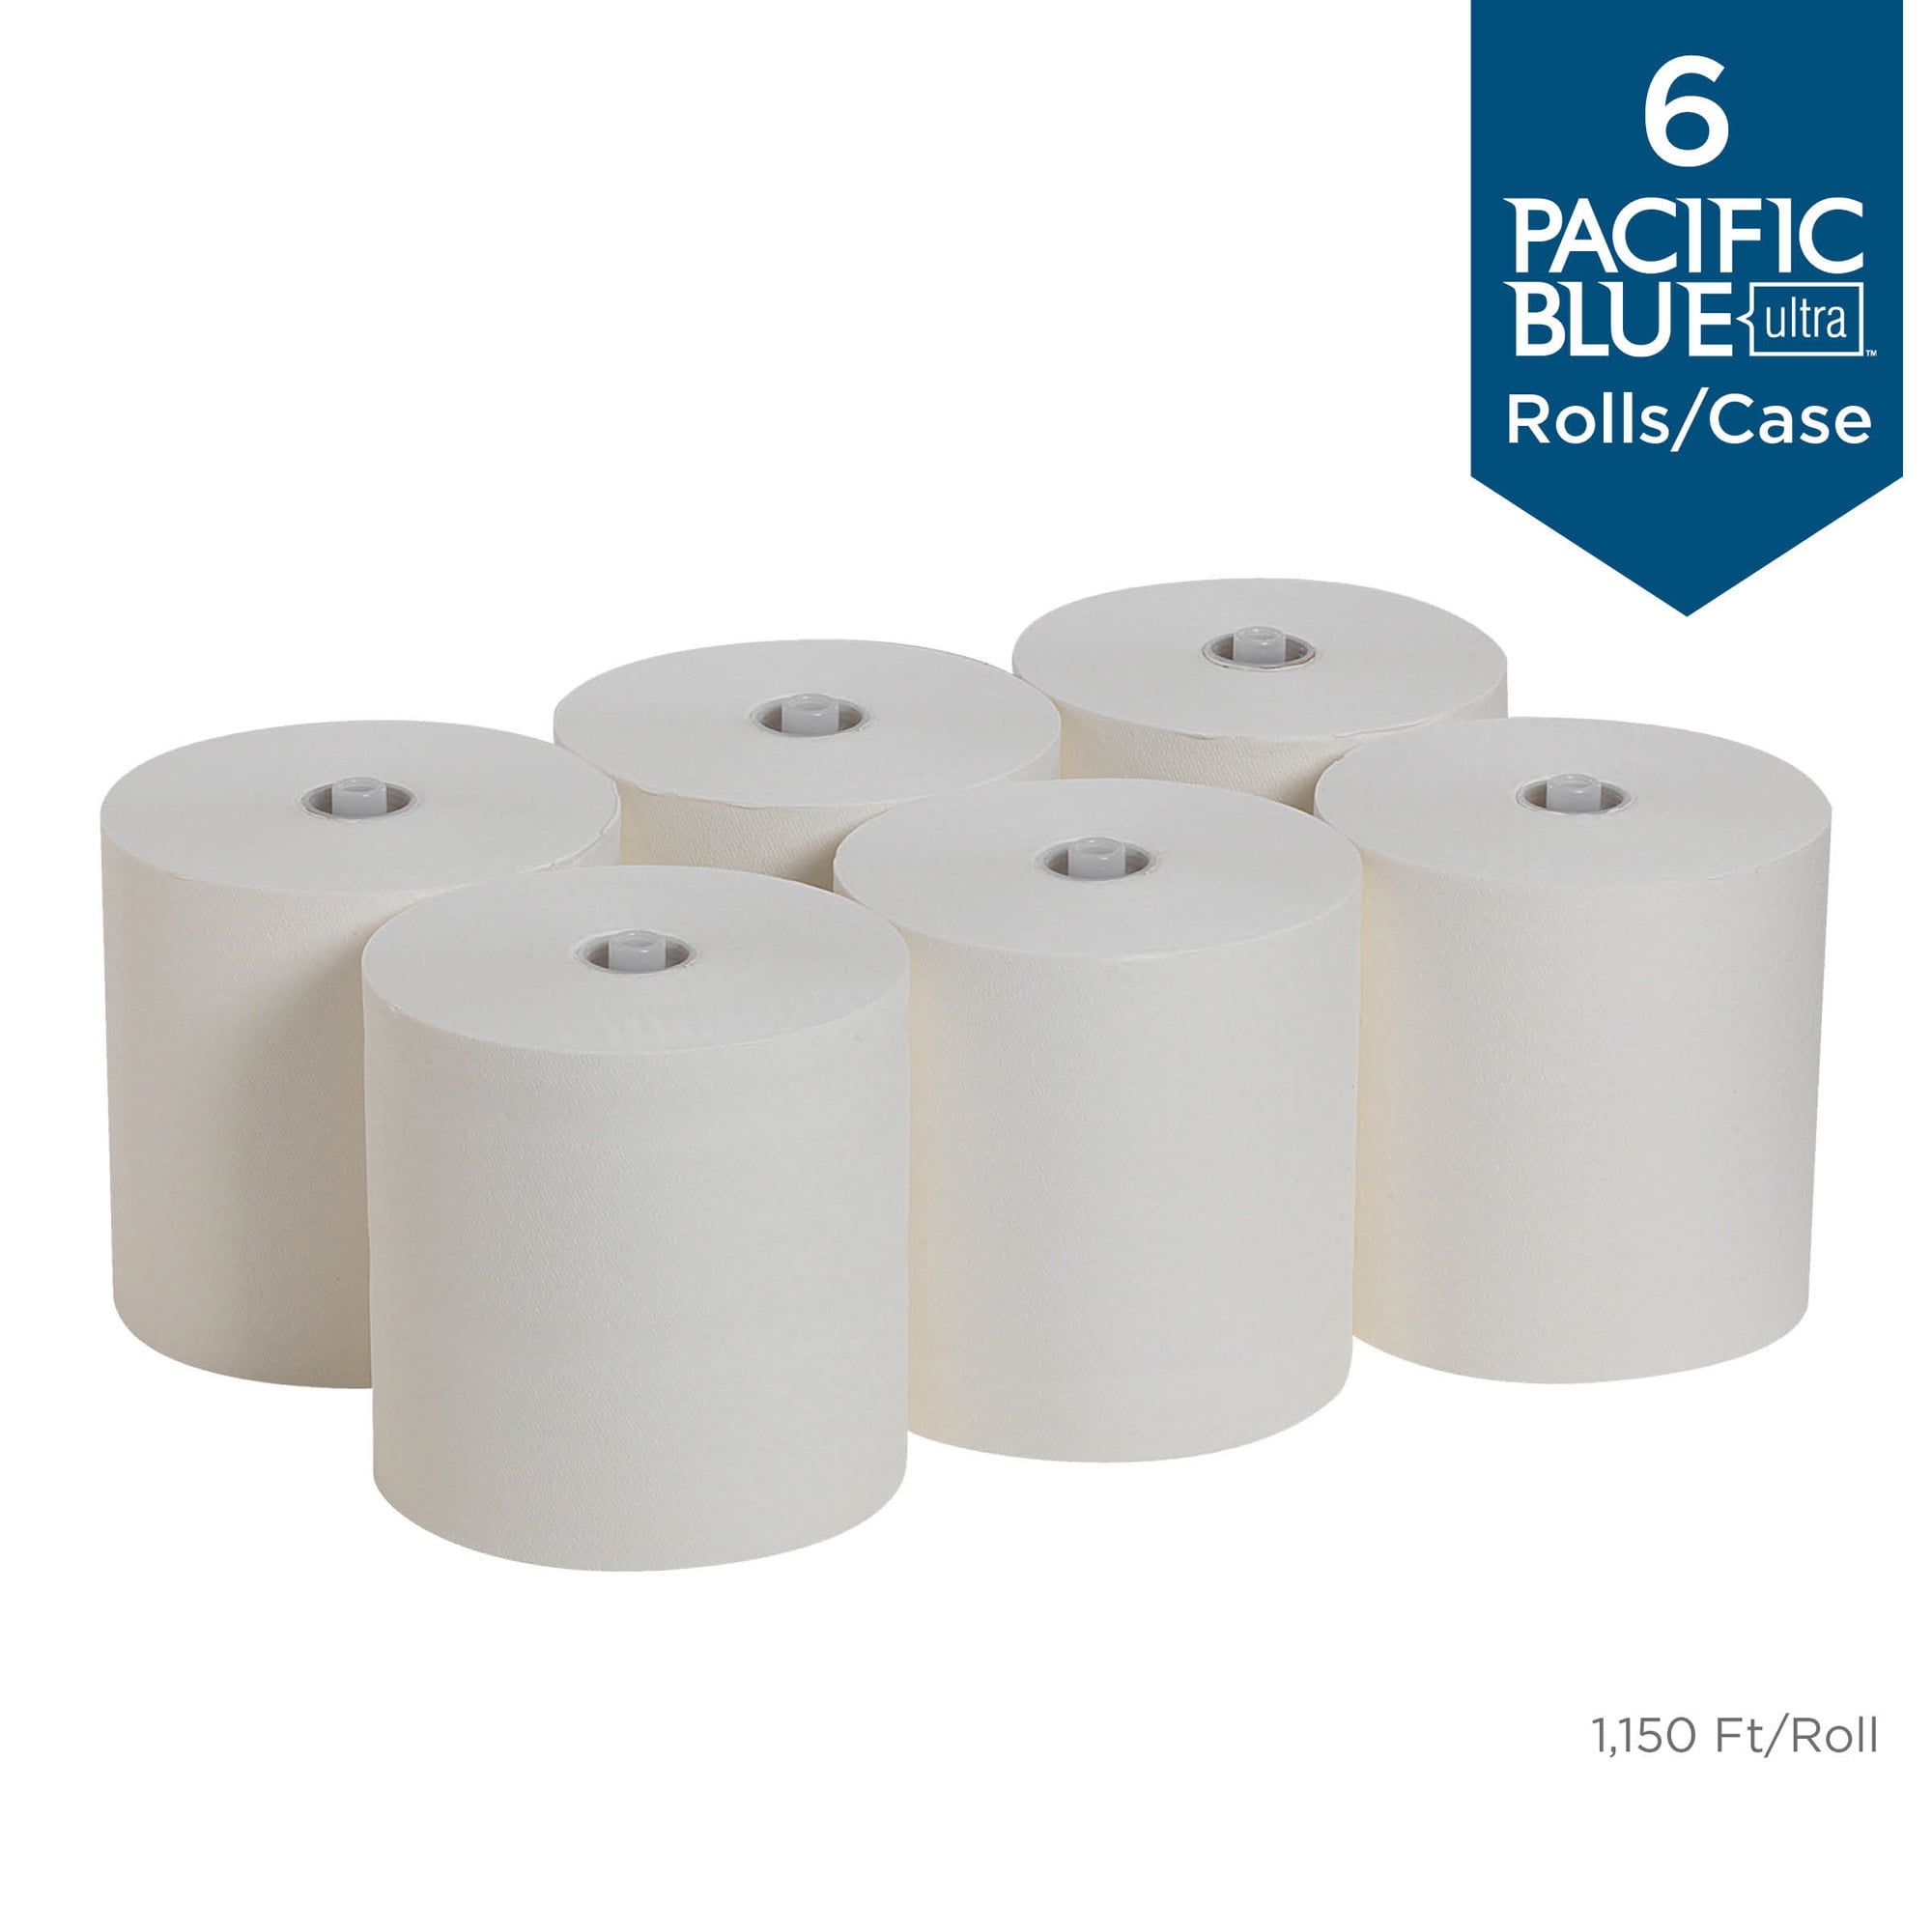 Georgia Pacific Professional Pacific Blue Ultra Paper Towels White 7.87 x 1150 